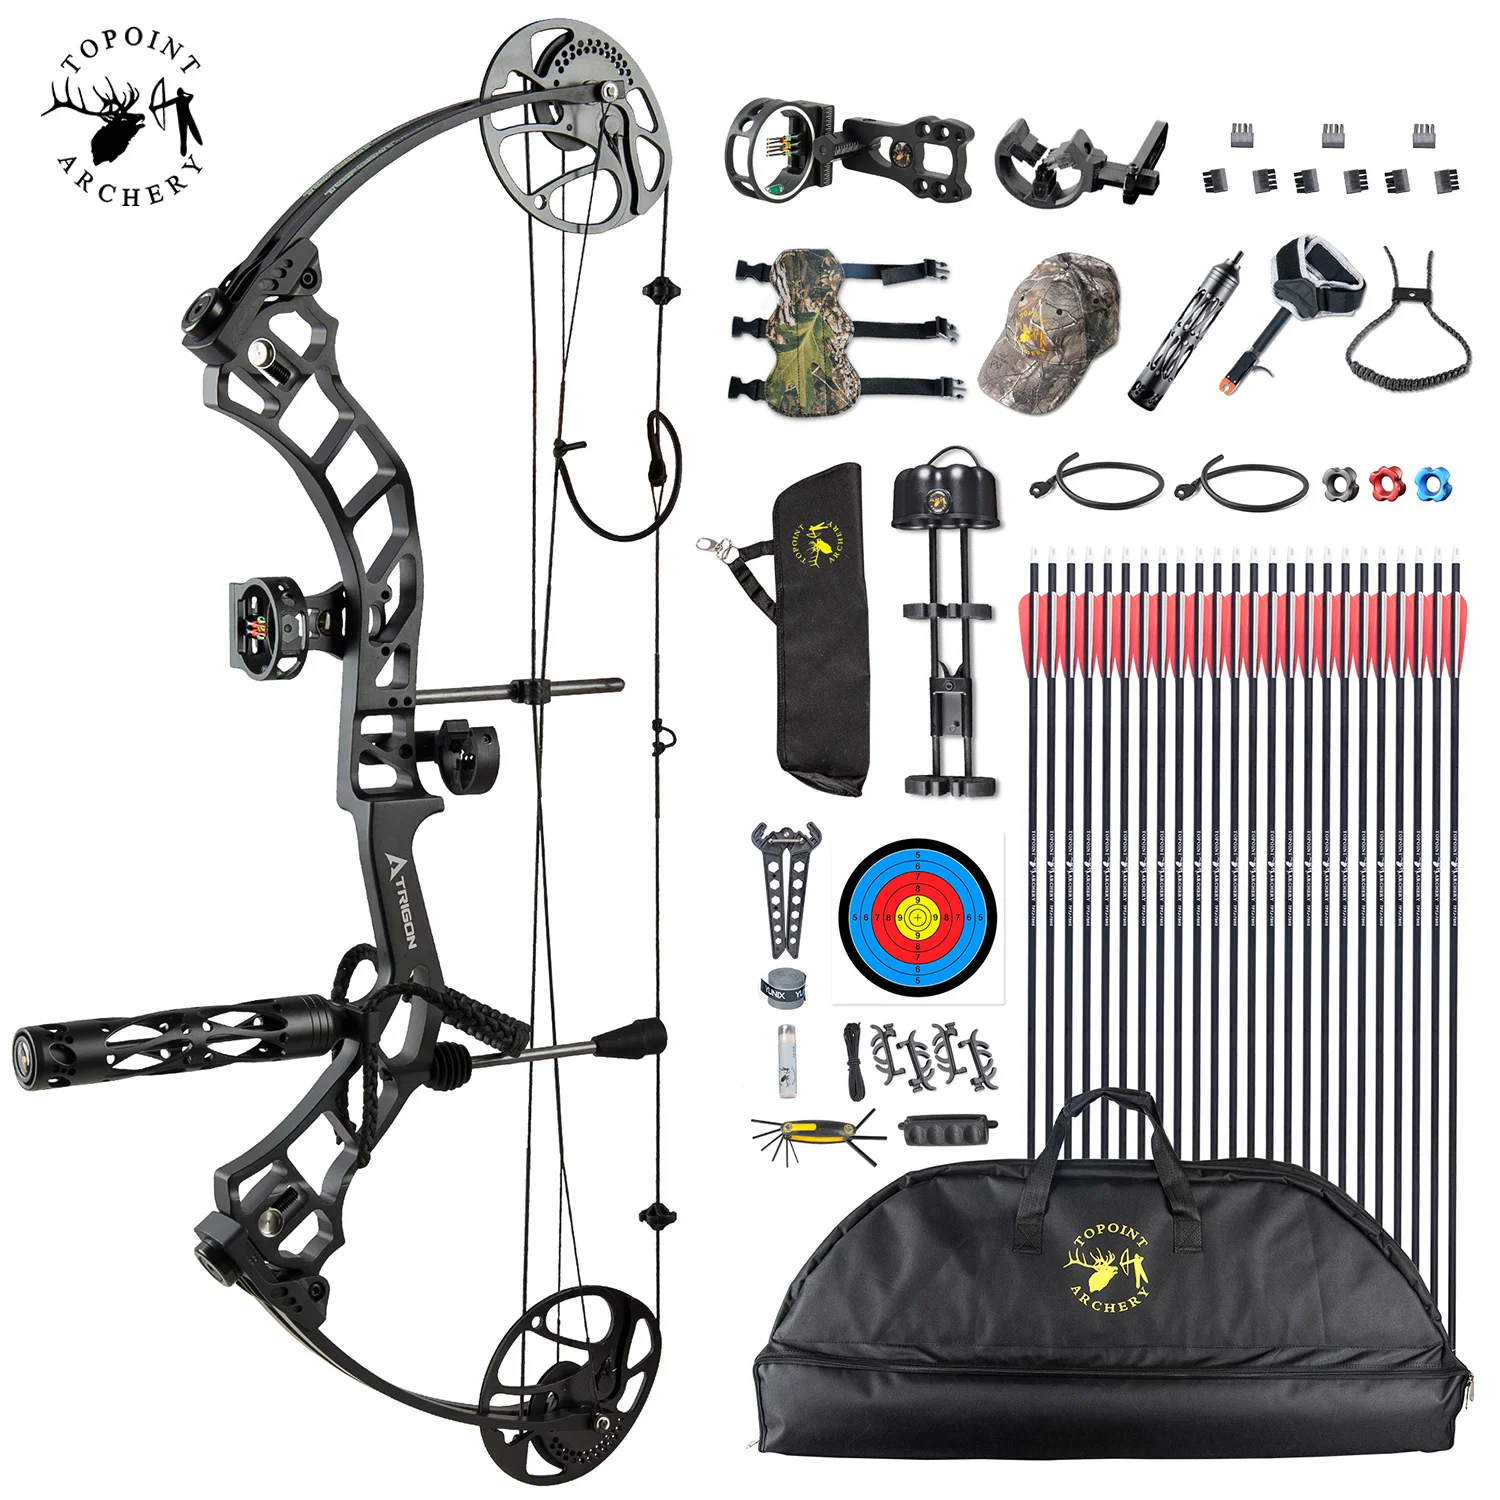 

Topoint Compound Bow Trigon Package,CNC Milling Riser,USA Gordon Composites Limb,BCY String,19"-30",19-70Lbs ibo 320fps